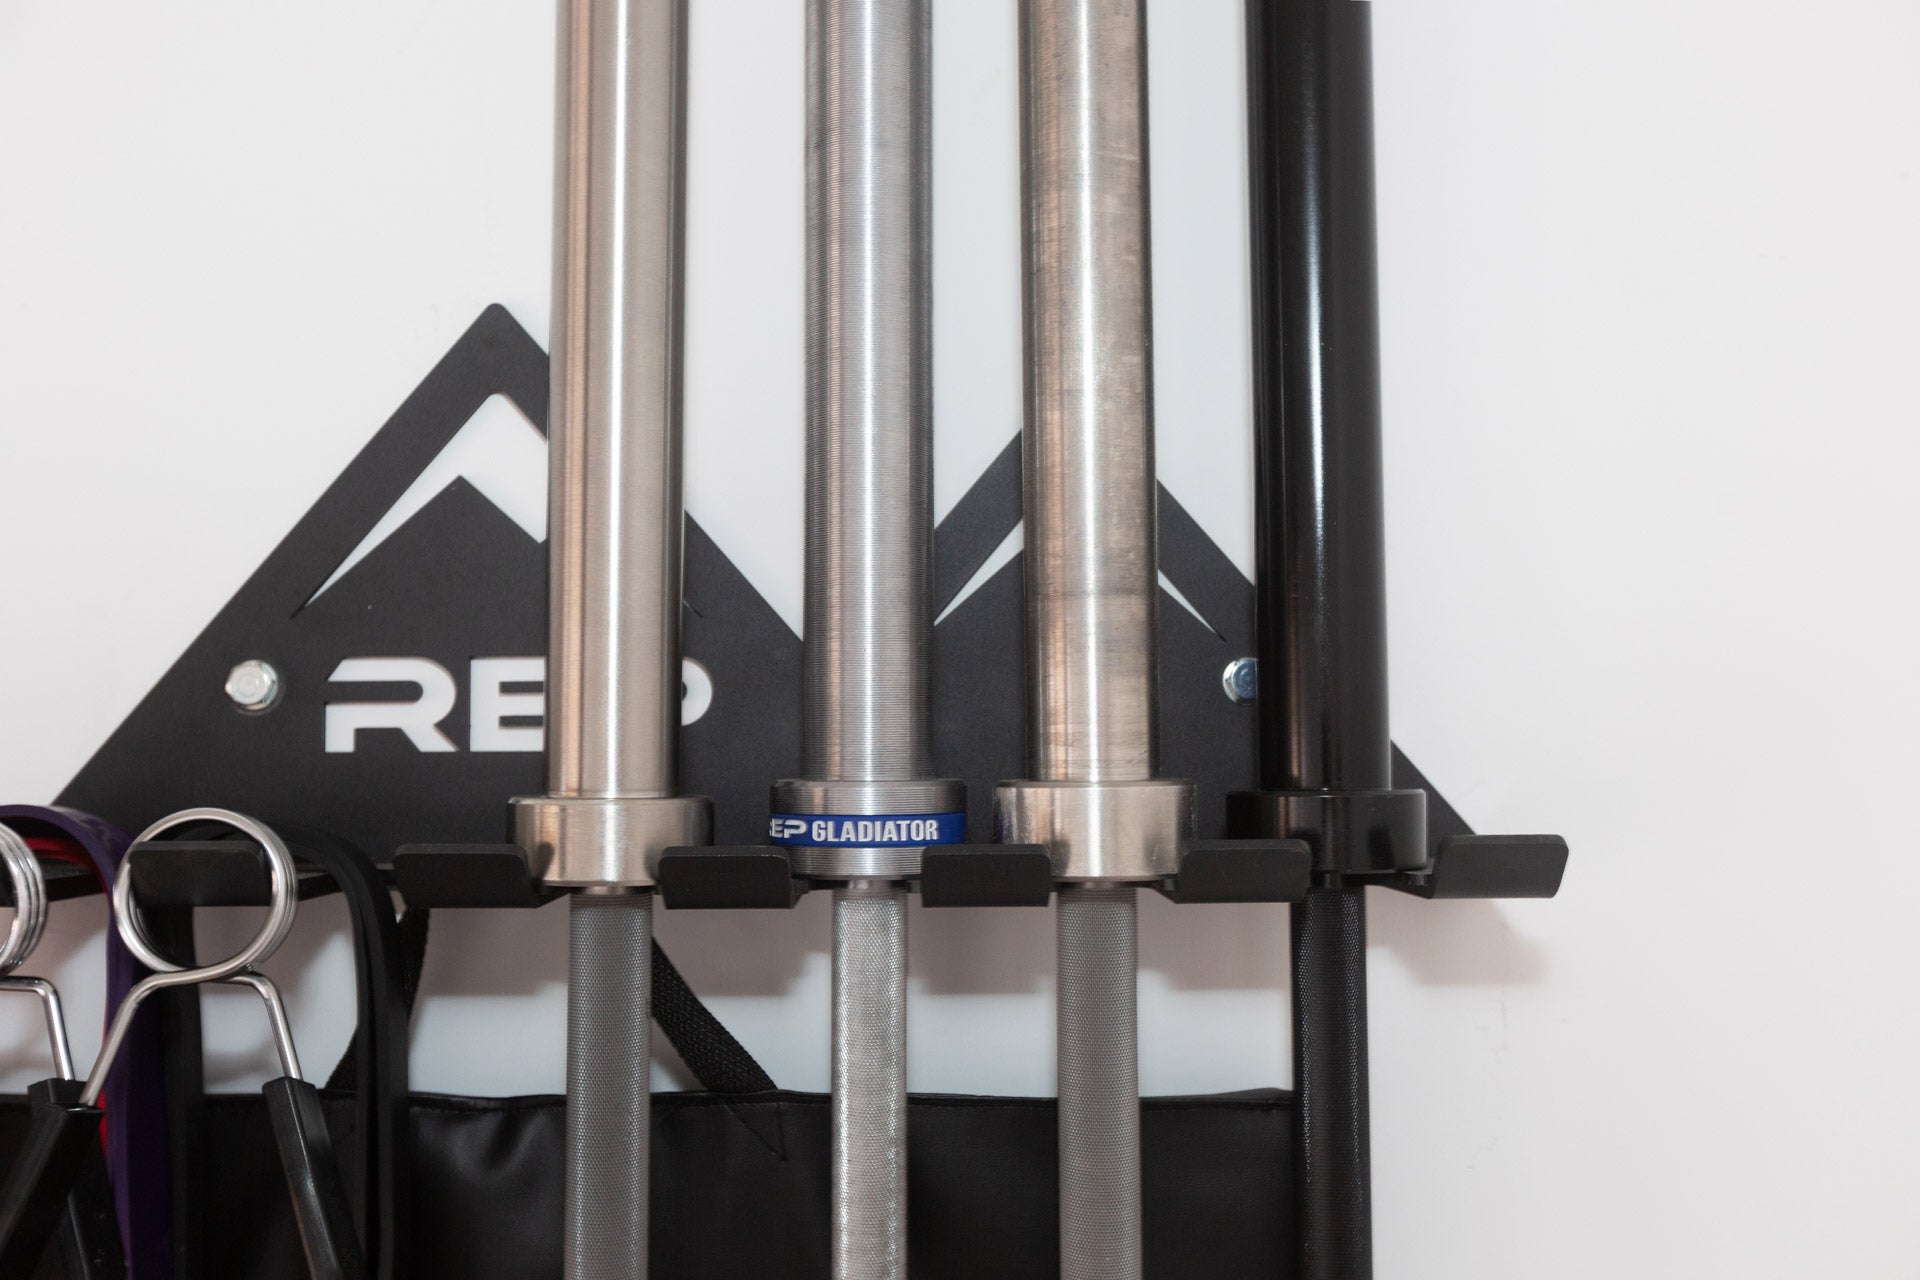 Close-up view of exercise bands, spring clips, and barbells all being stored on the REP Multi-Use Wall Storage.